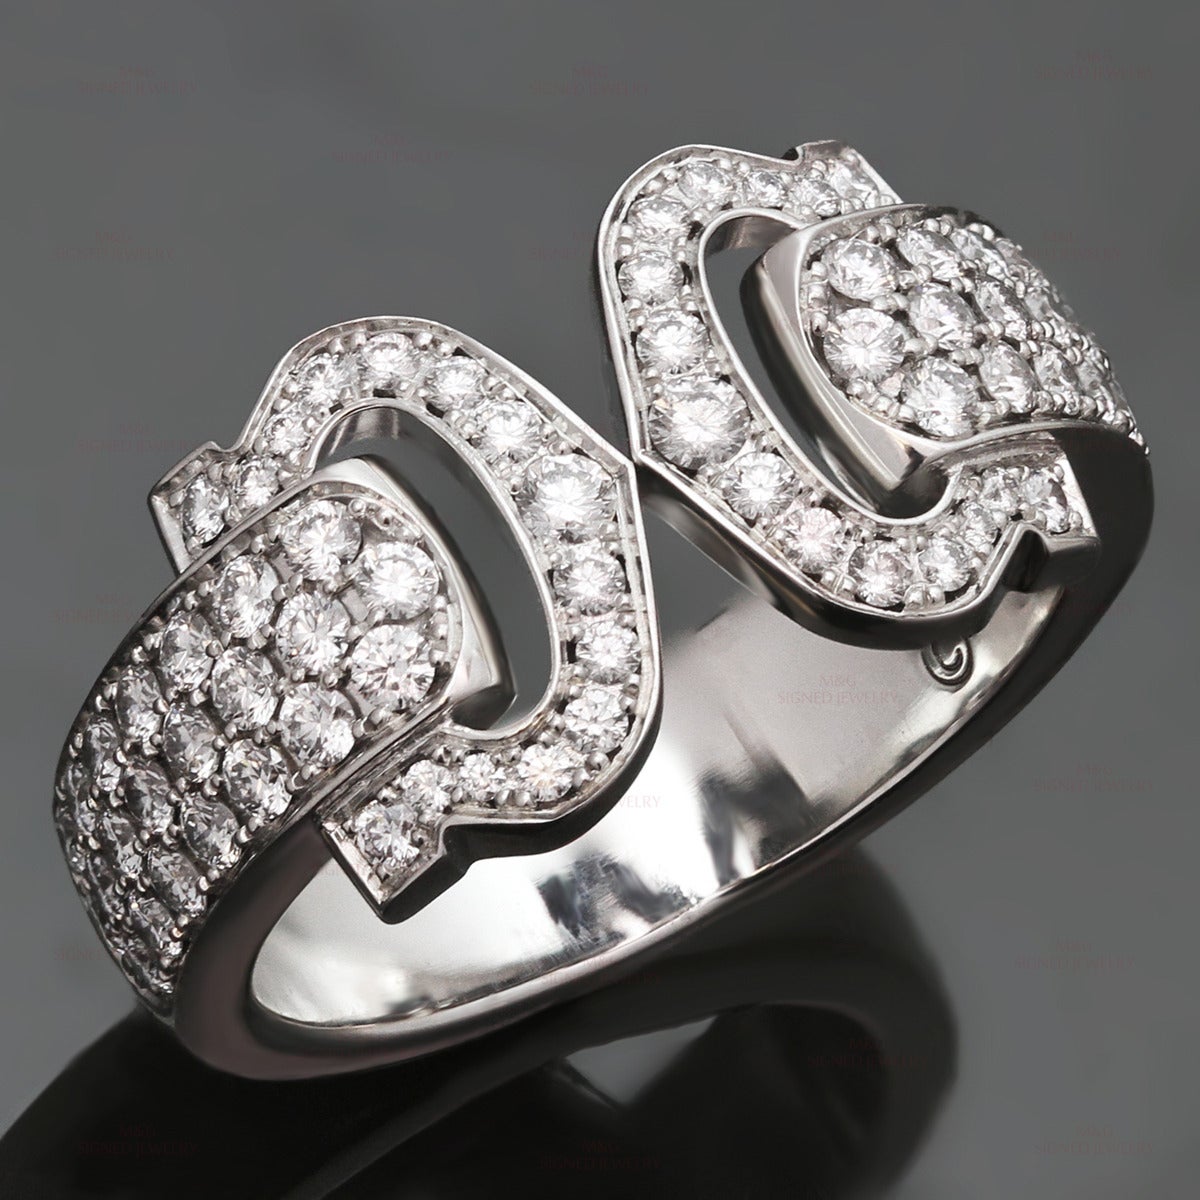 This fantastic Cartier ring from the Logo collection features the iconic Double C Decor design crafted in 18k white gold and set with round brilliant E-F VVS1-VVS2 diamonds of an estimated 1.20 carats. Made in France circa 2008. Measurements: 0.38